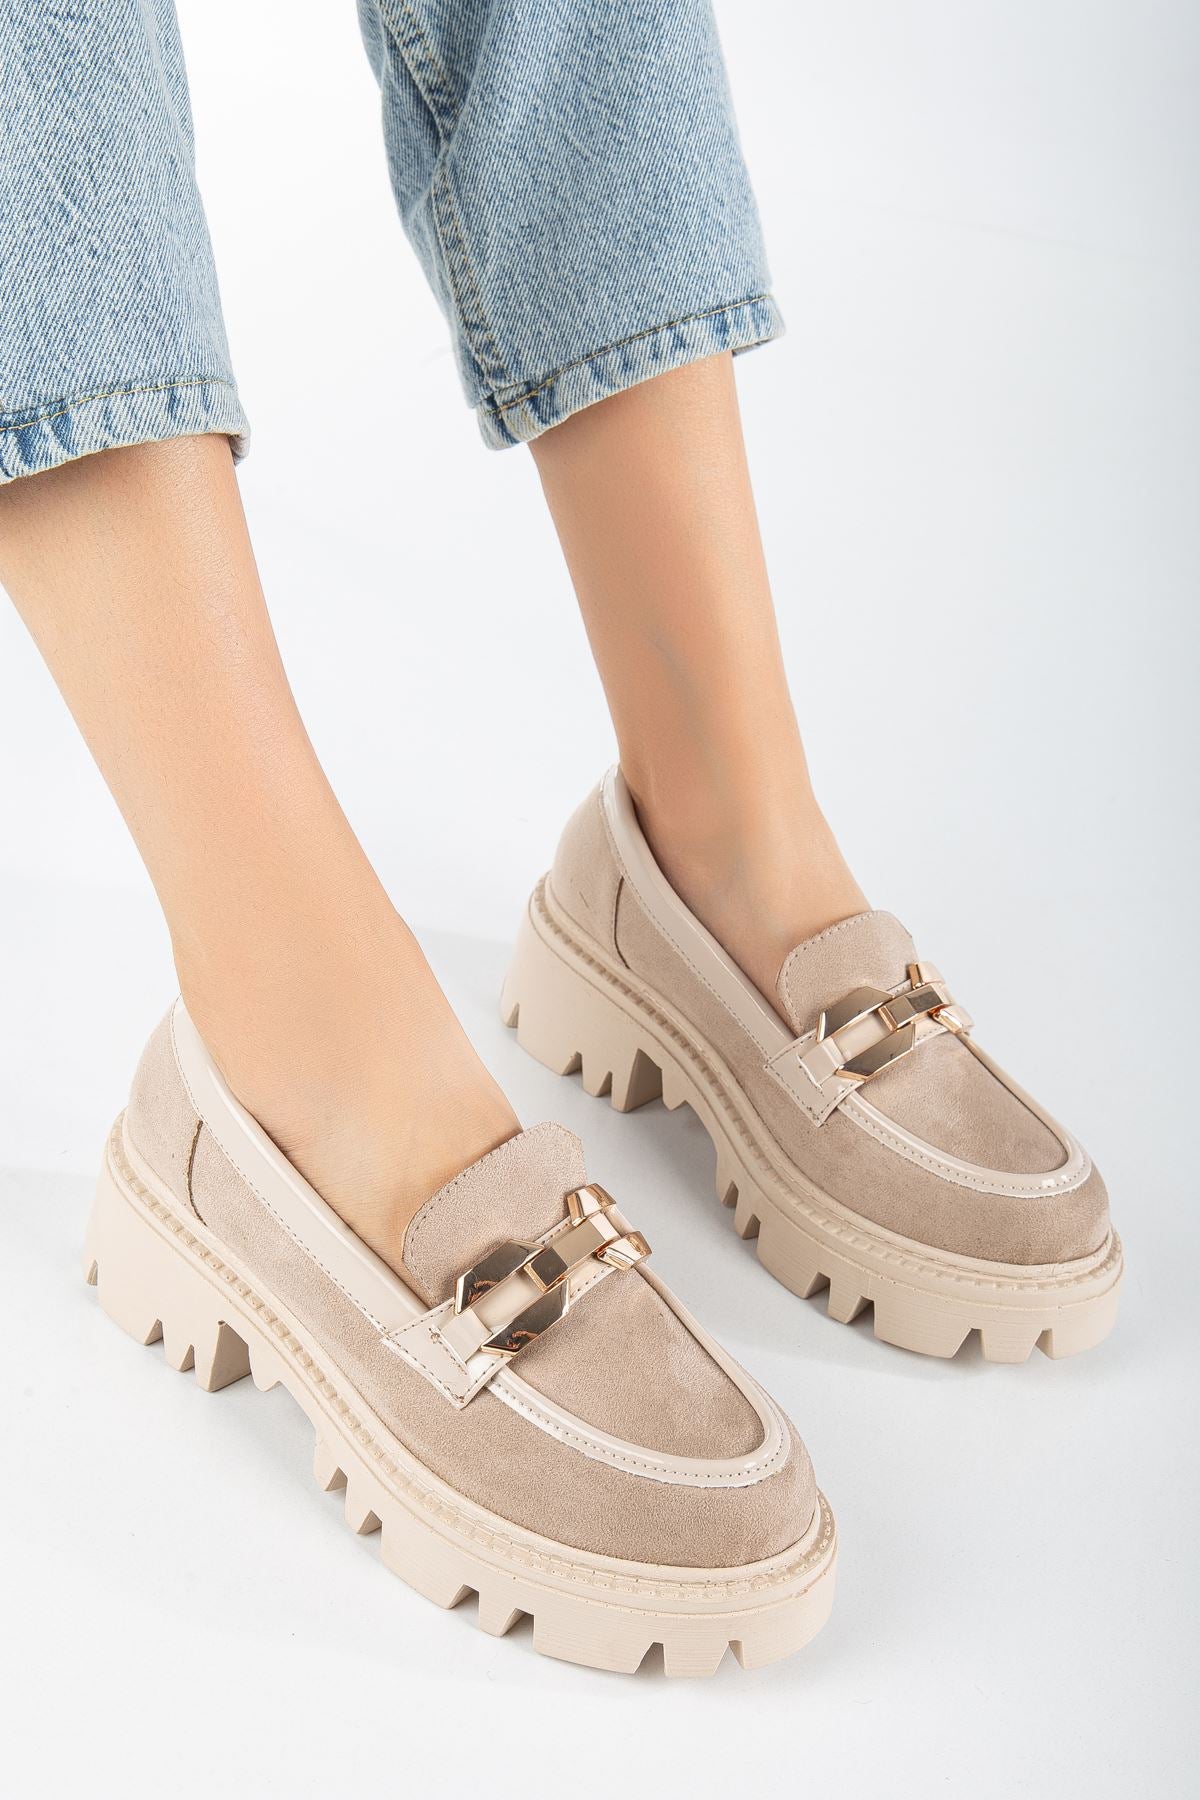 SONO Cream Suede Oxford Women's Shoes - STREETMODE™